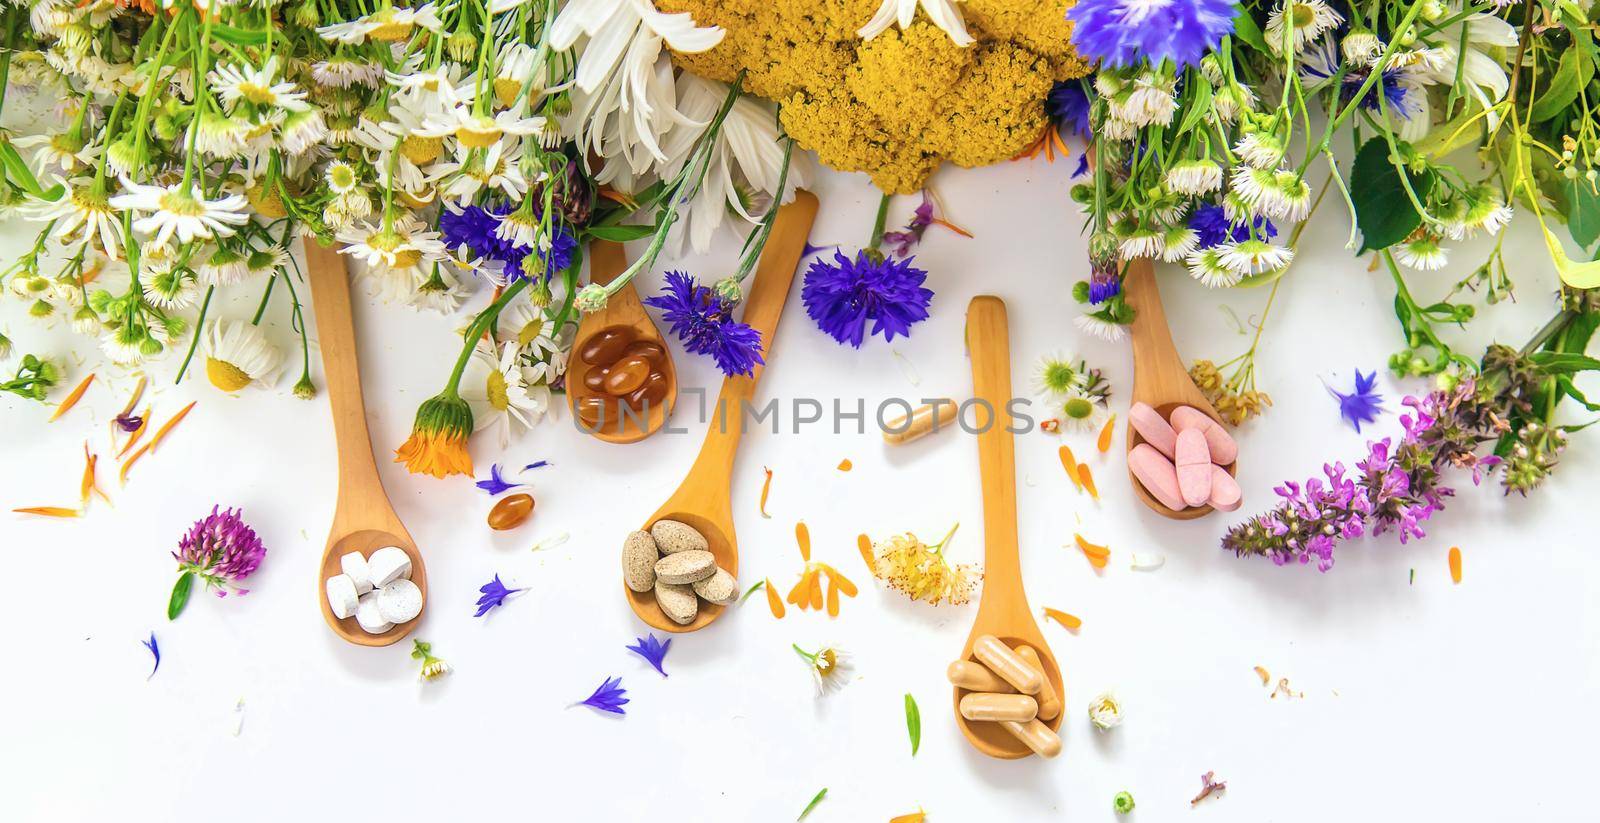 Homeopathy and dietary supplements from medicinal herbs. Selective focus. by yanadjana